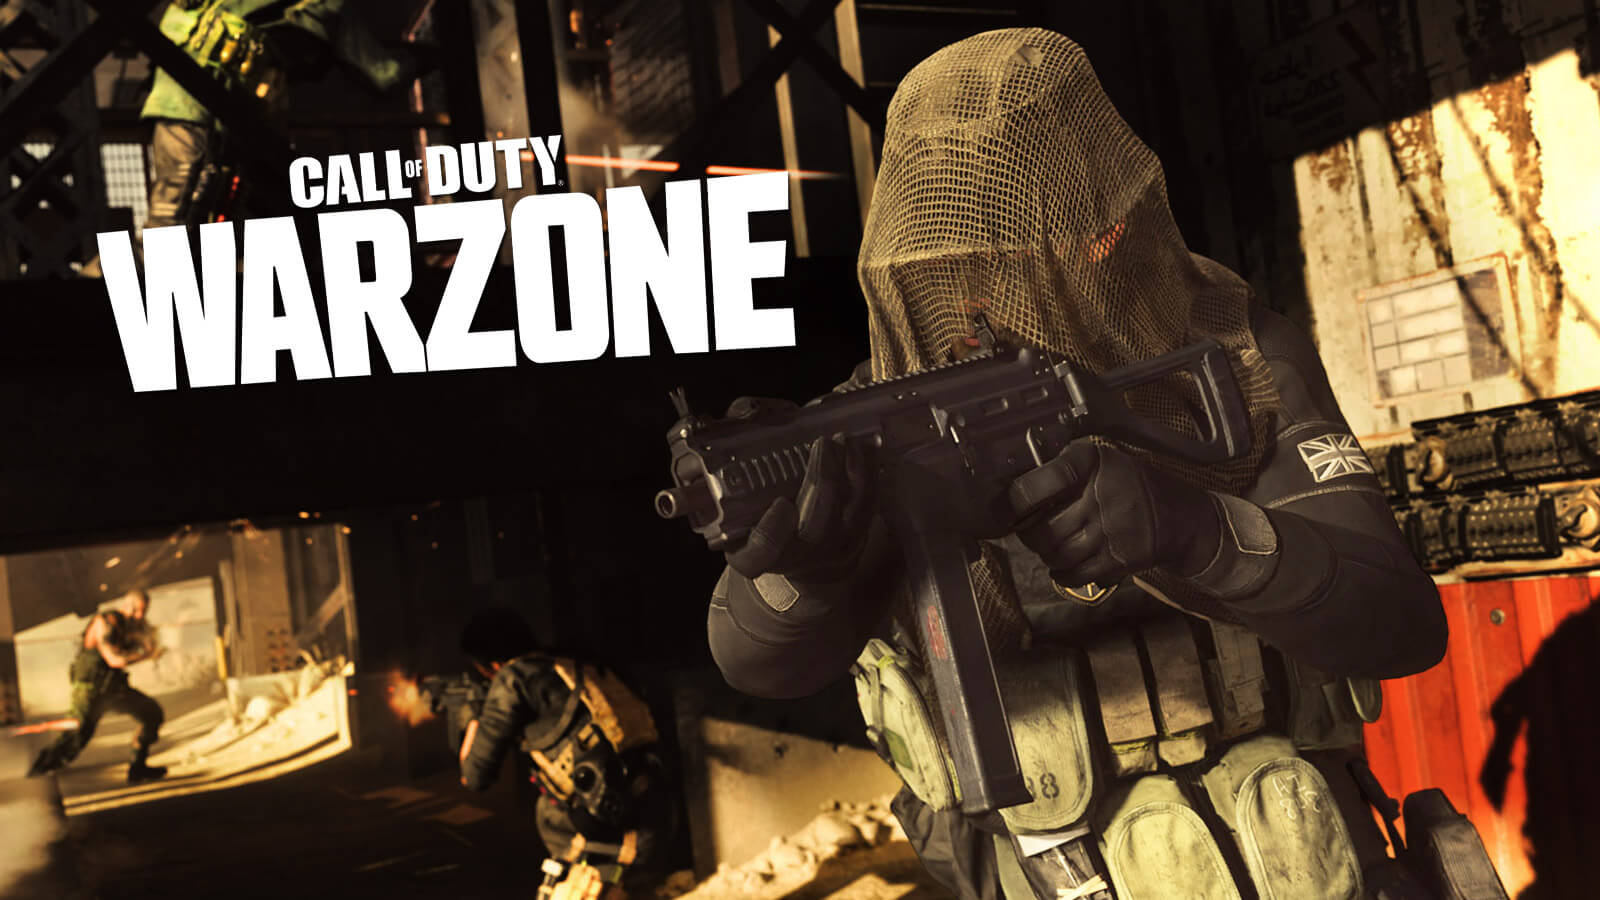 Call of duty warzone чит. Call of Duty Warzone. Call of Duty Warzone 2. Call of Duty Warzone 2 стрим. Варзоне Call of Duty.